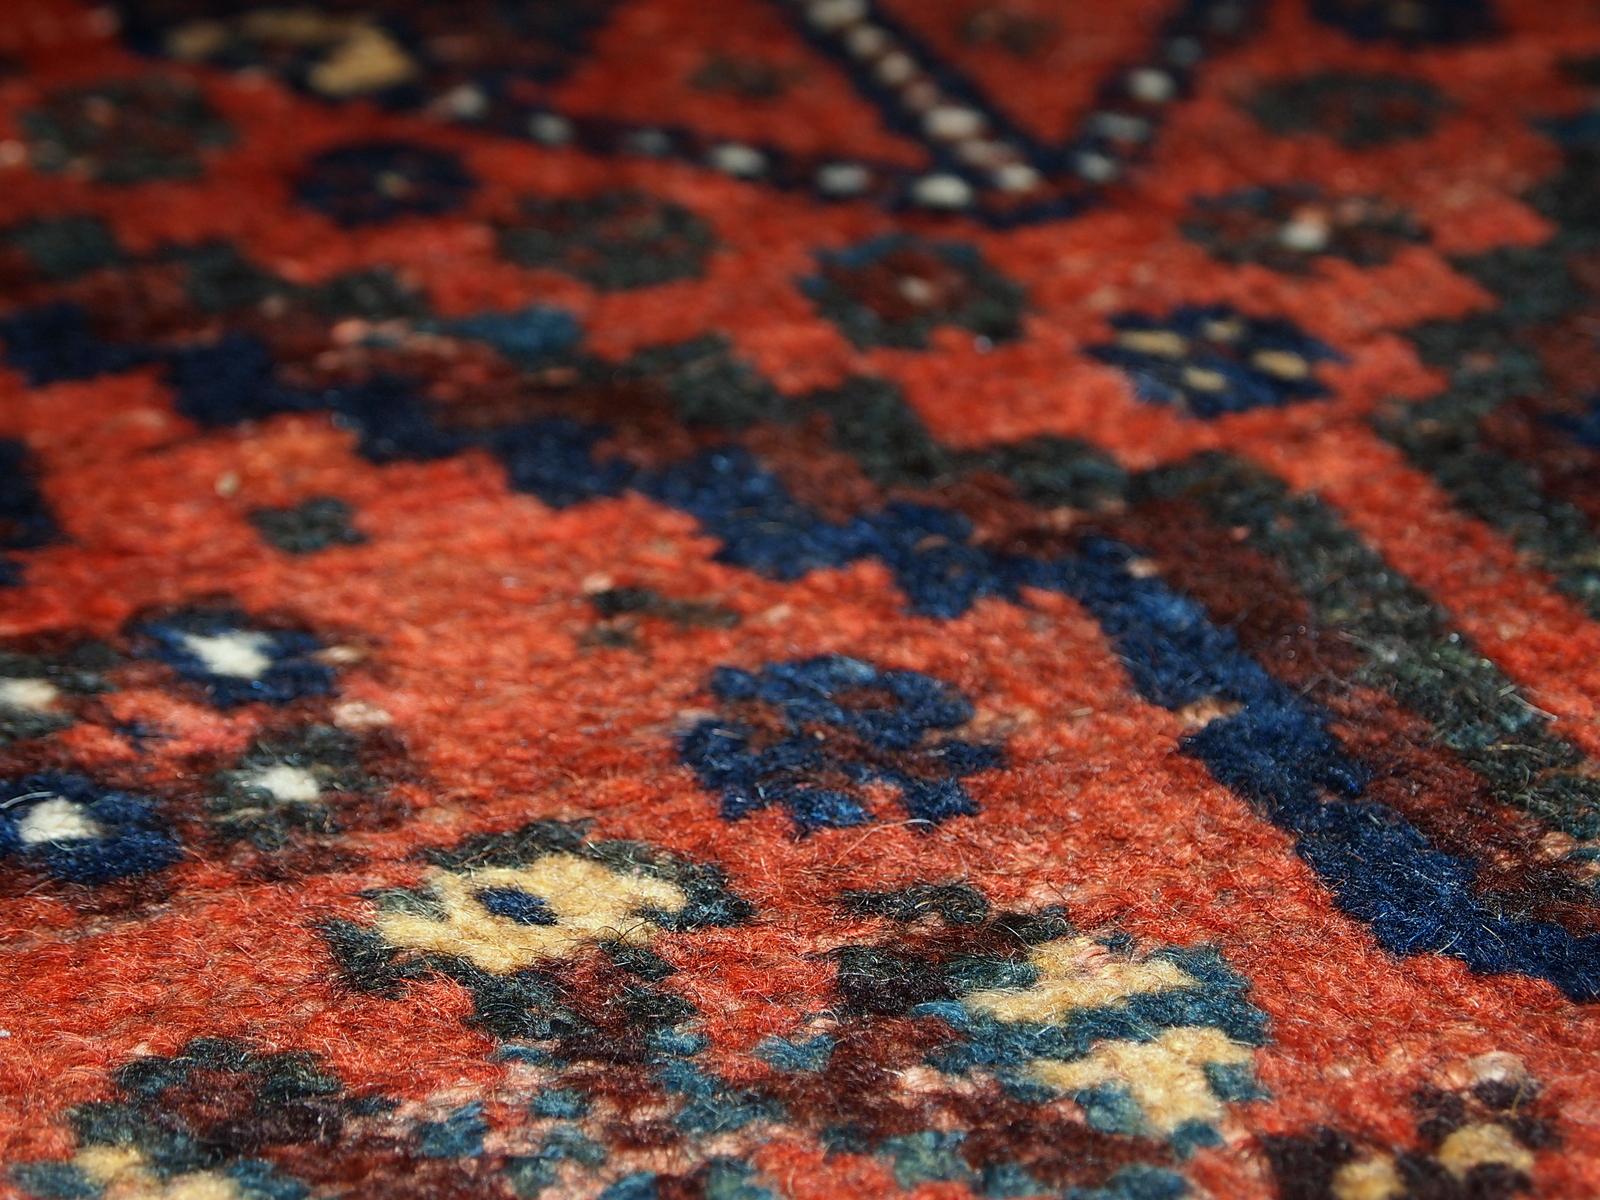 Antique collectible Shiraz Style rug in original condition, it has some signs of age. The rug is in 3 main shades: Navy blue, bright red and white. Measures: 2.9' x 3.1' (88cm x 97cm).